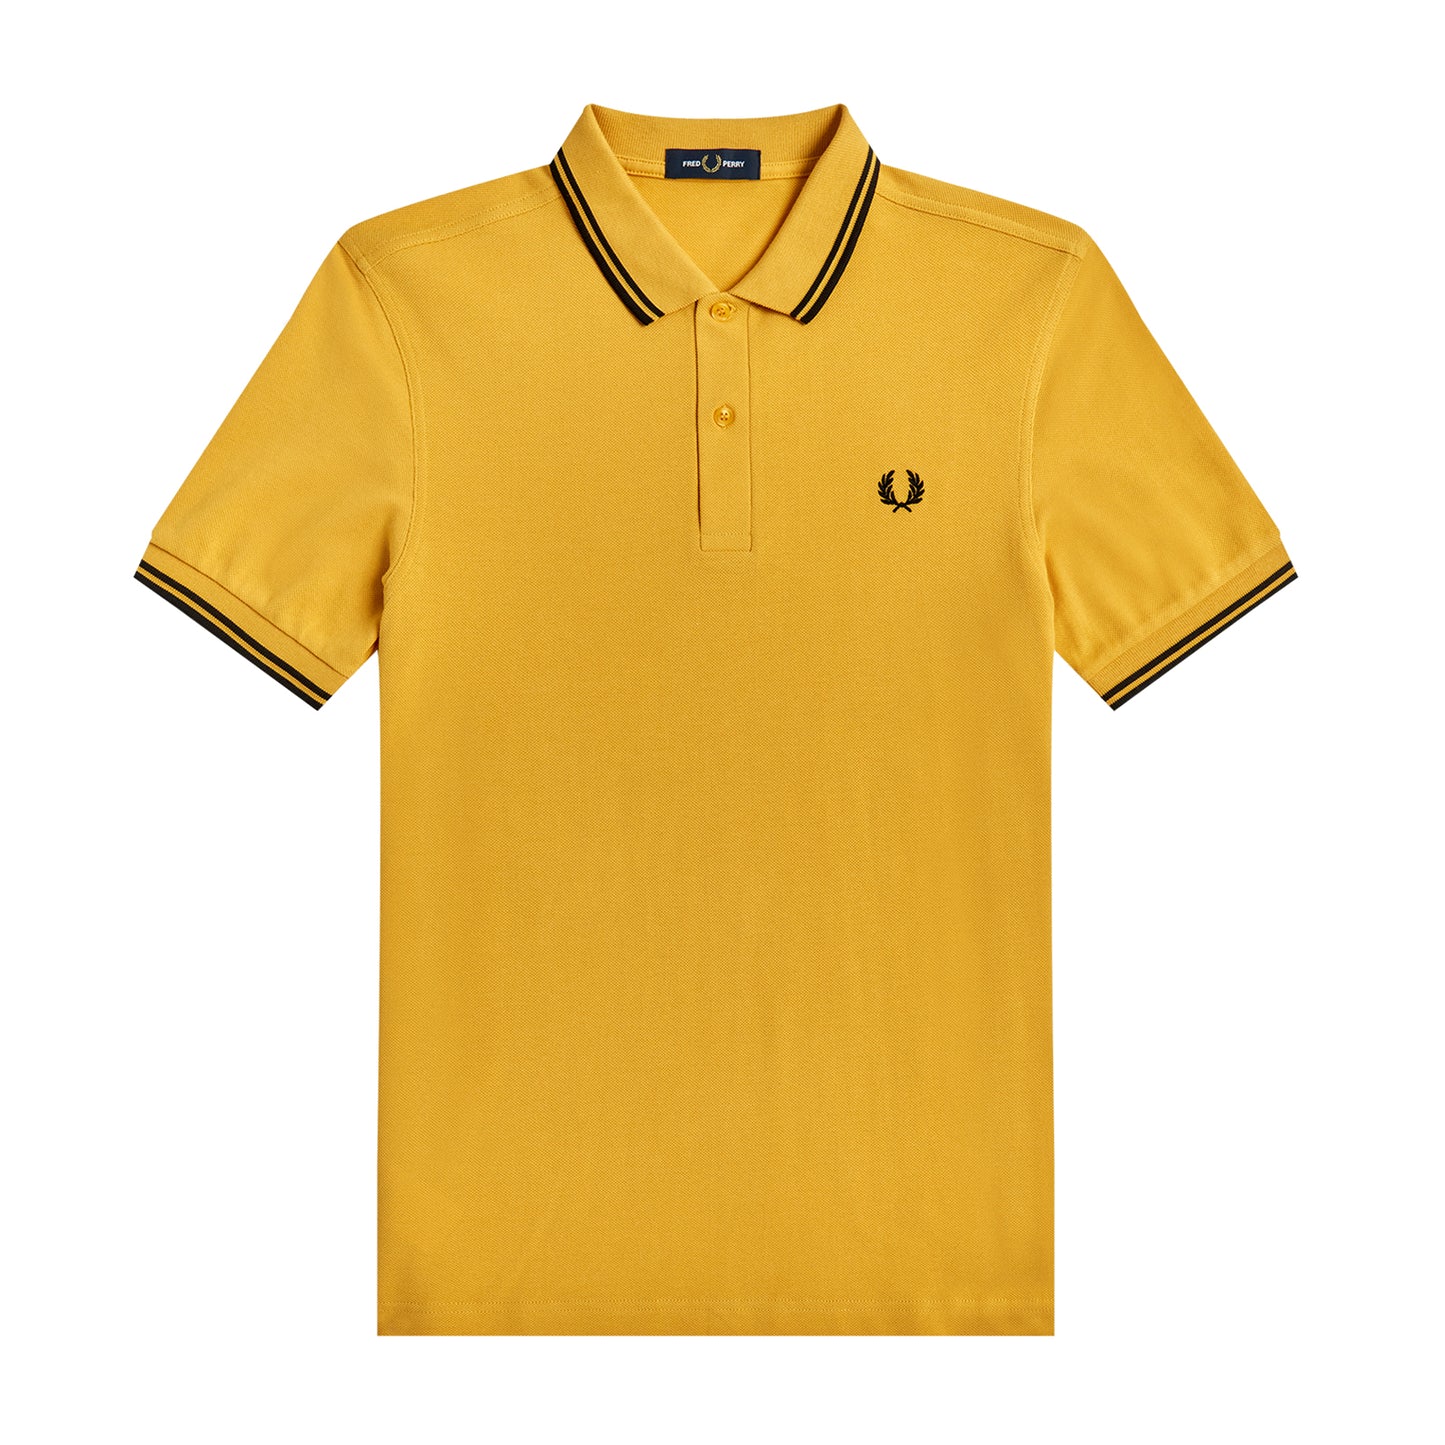 Fred Perry Twin Tipped Fred Perry Shirt Gold/Black/Black. Foto de frente.